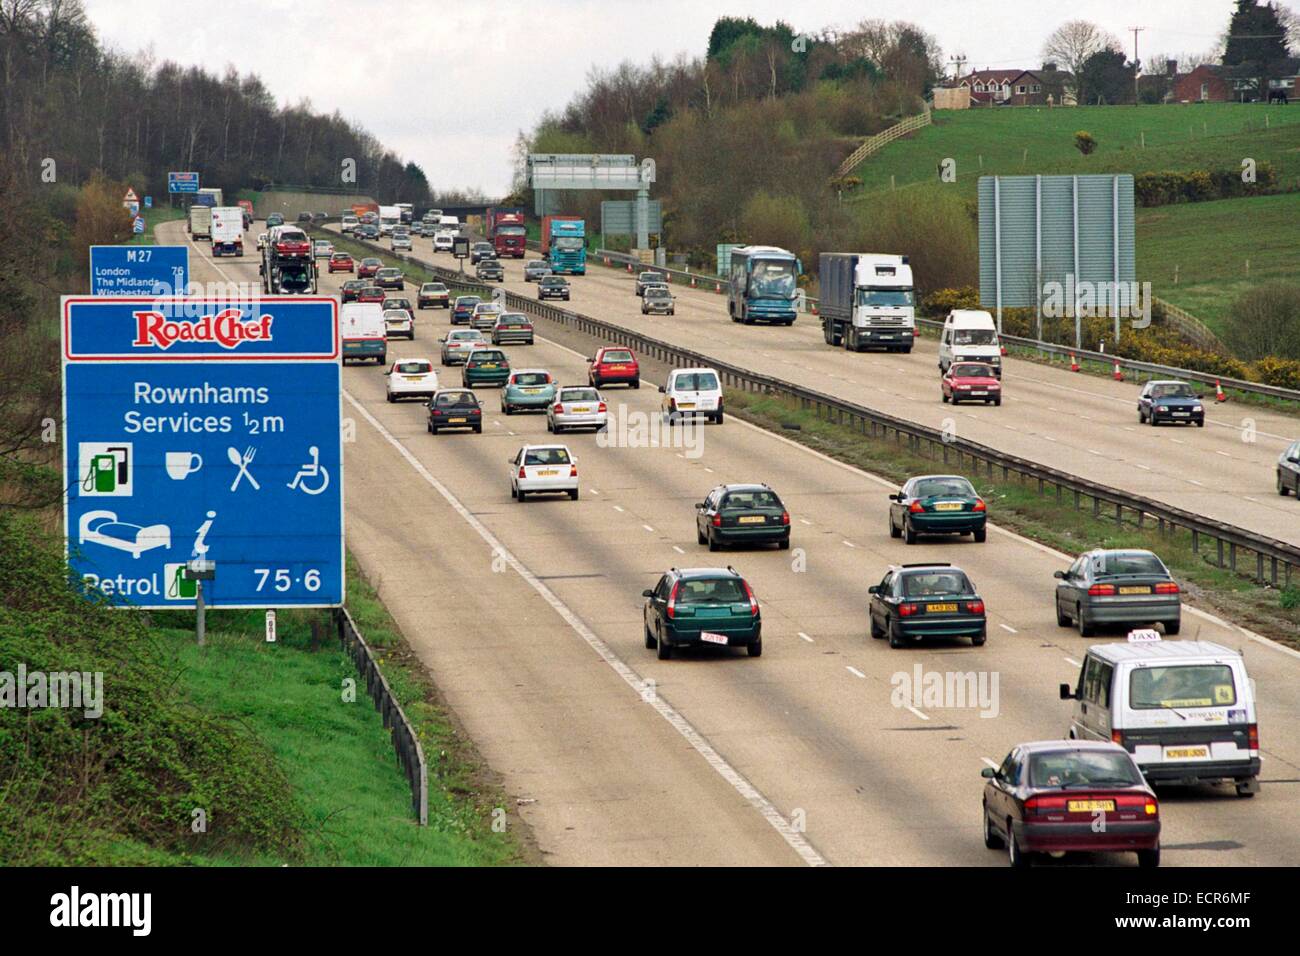 Vehicle traffic heading eastbound on the M27 near Rownhams service station, Southampton, Hampshire UK in the year 2000. Stock Photo